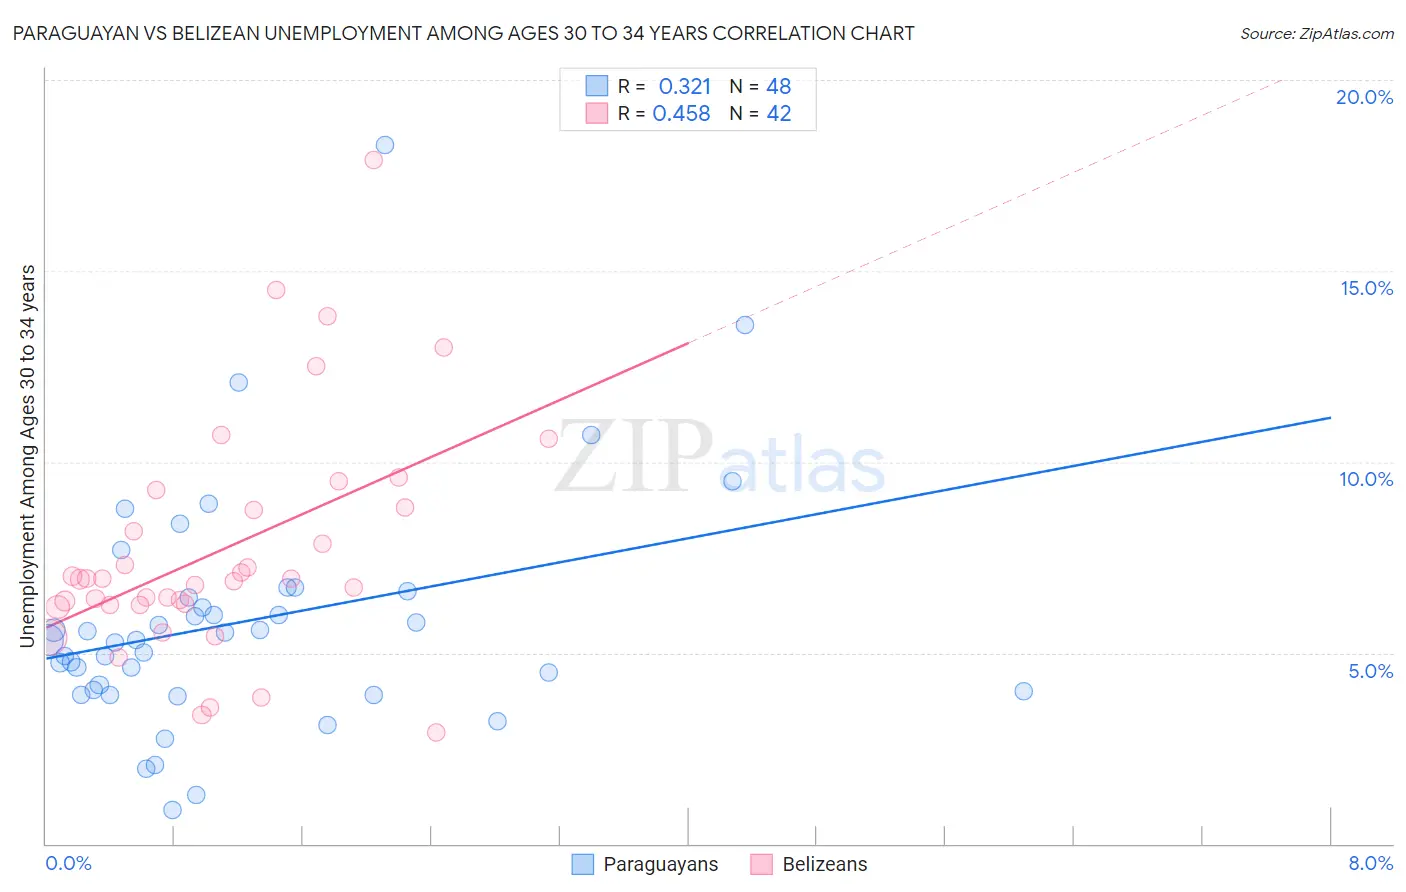 Paraguayan vs Belizean Unemployment Among Ages 30 to 34 years